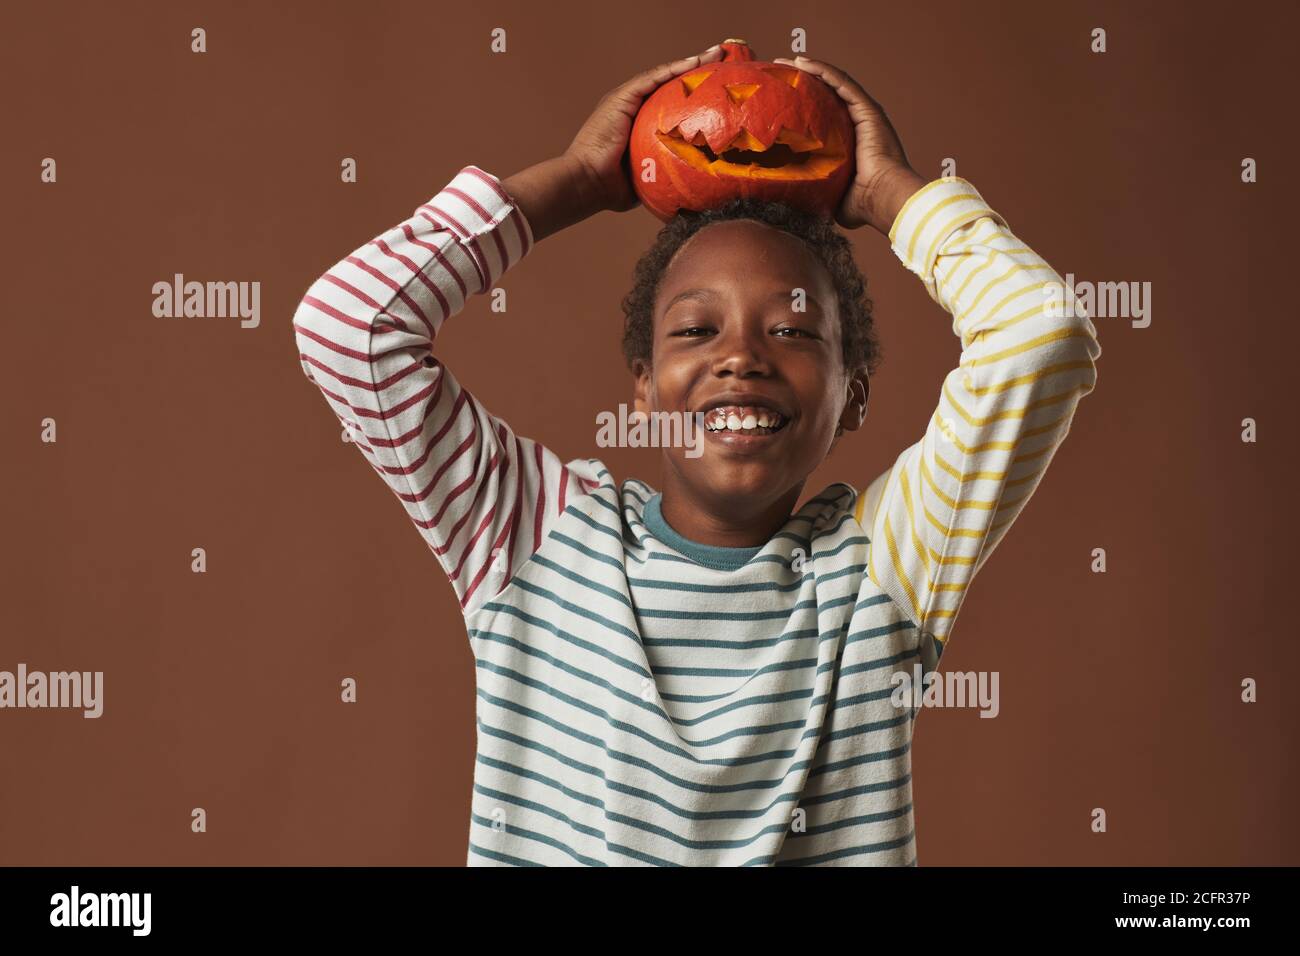 Cheerful African American boy wearing striped long-sleeve shirt holding Jack O' Lantern on his head smiling at camera, studio portrait Stock Photo